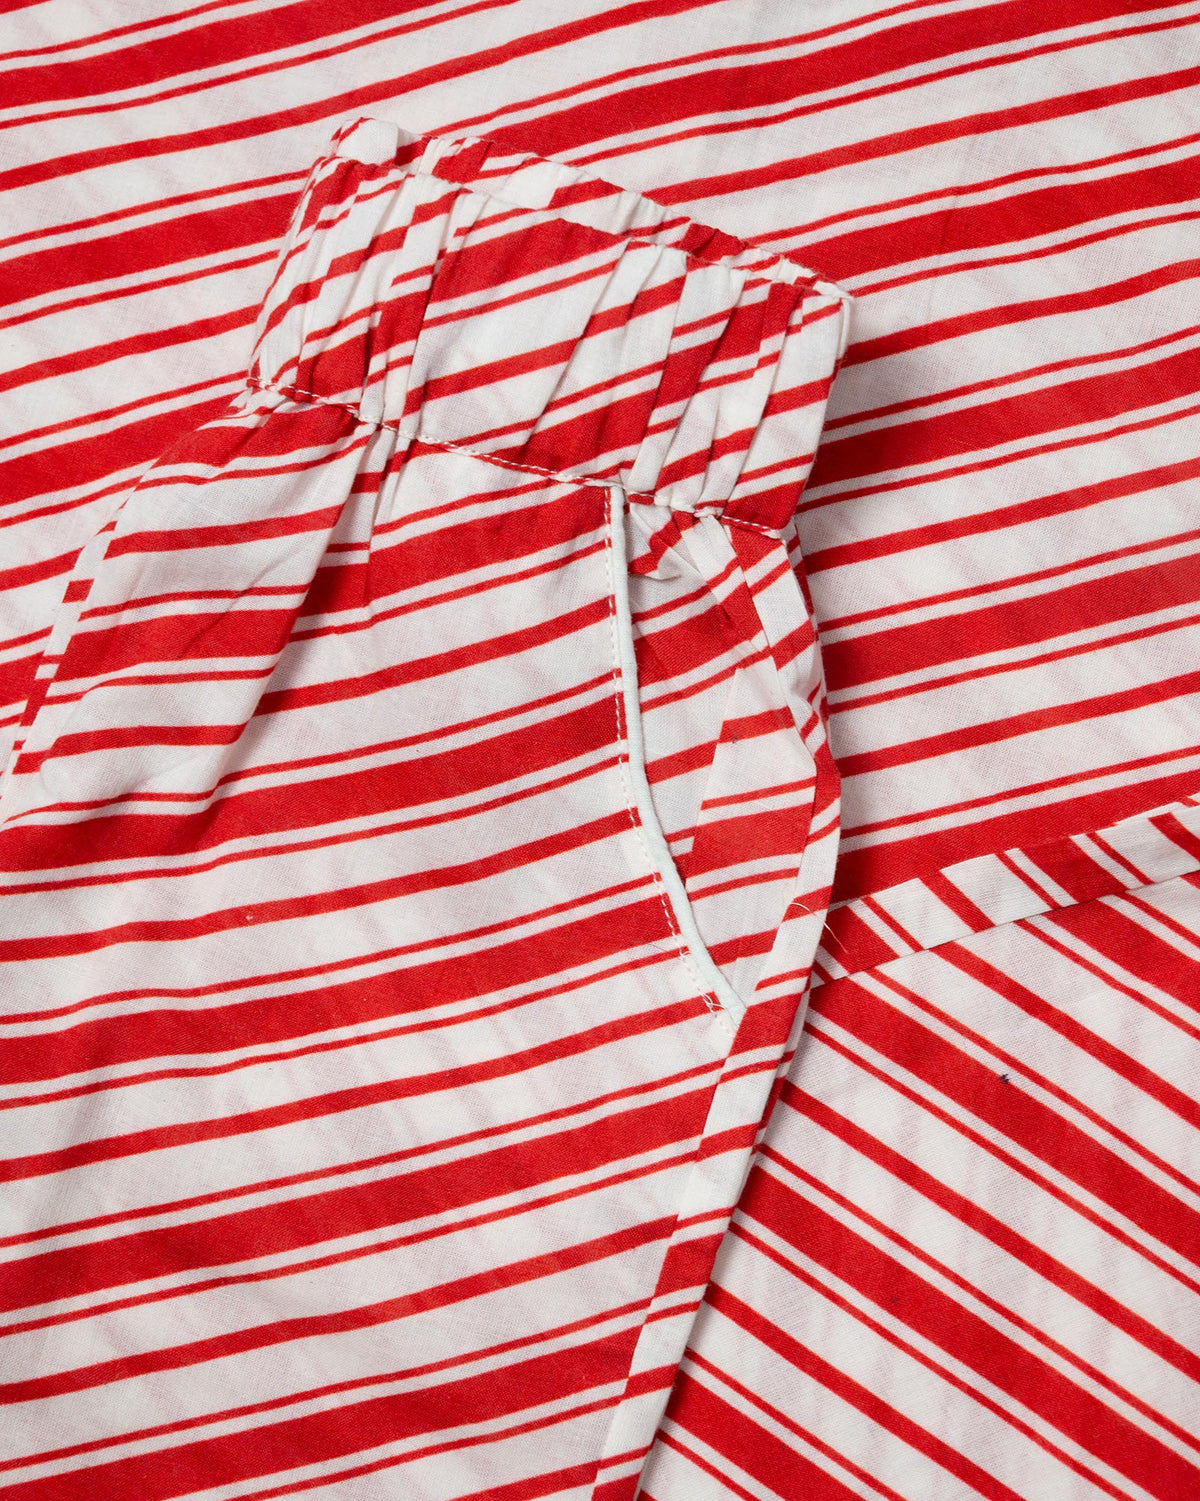 Candy Cane Striped Button Down Pajamas for Adult